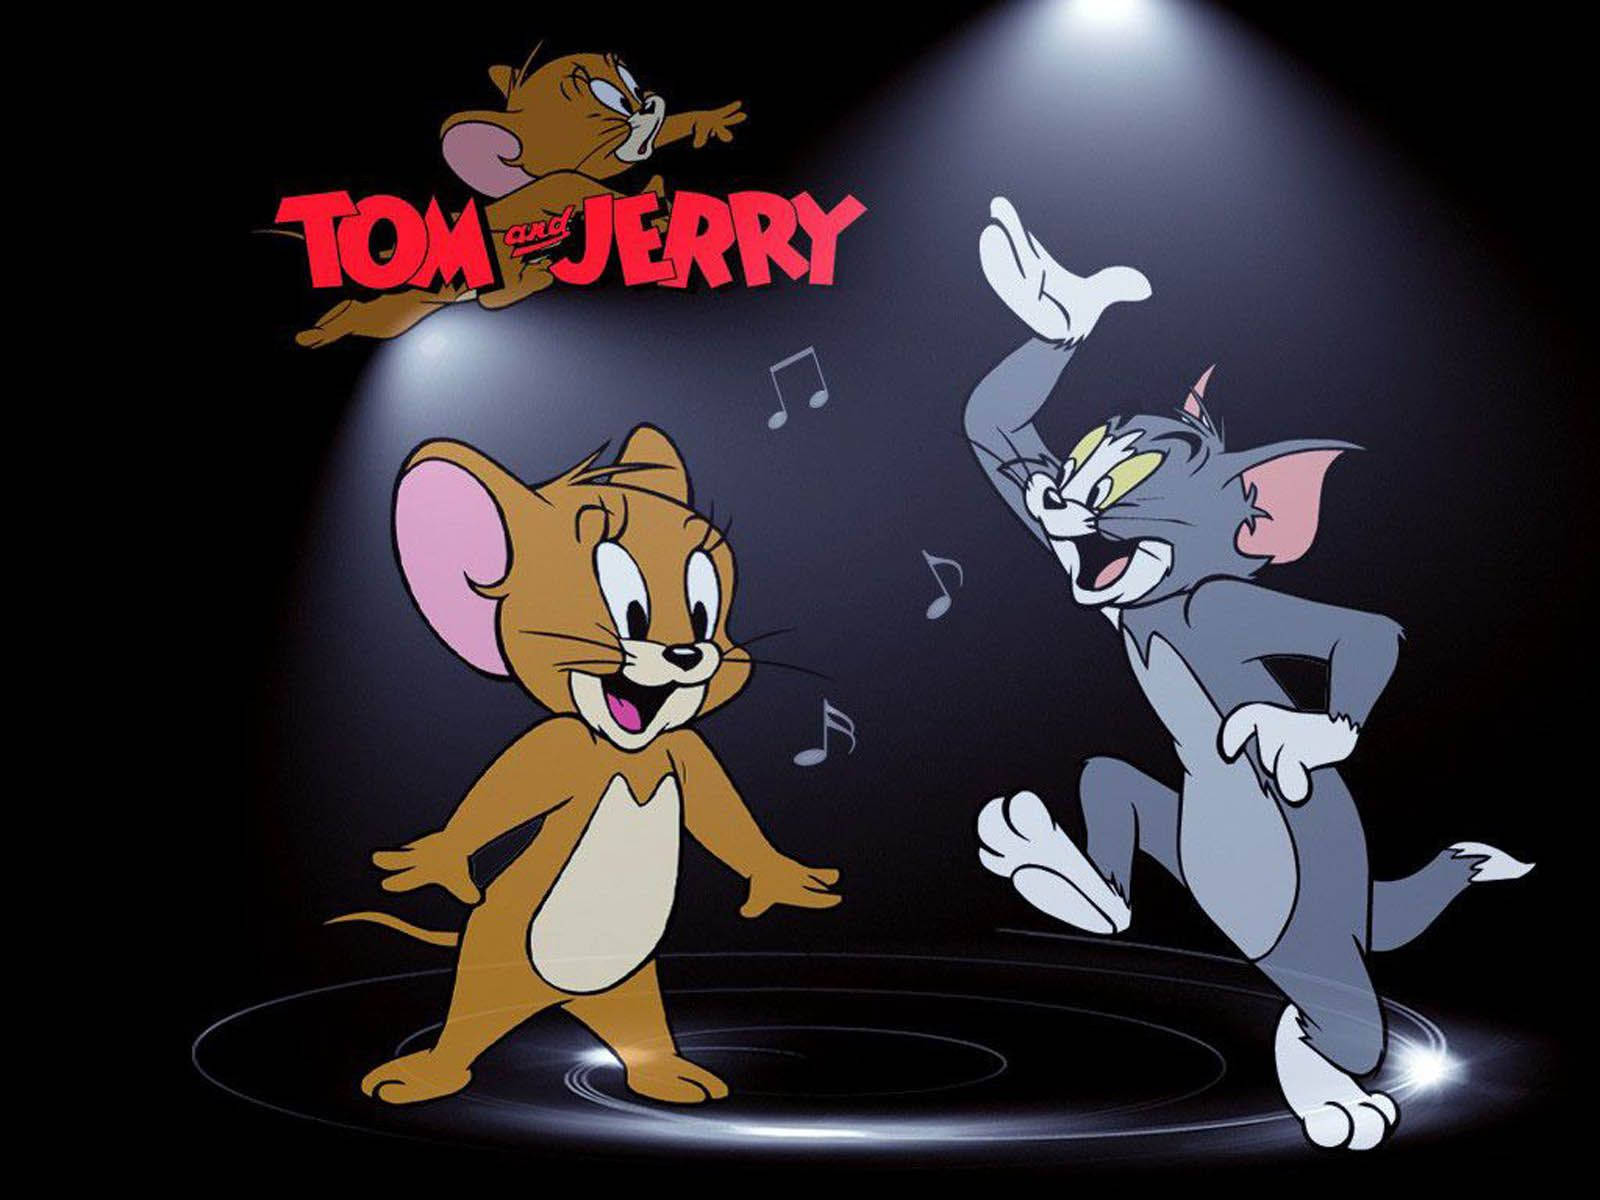 Free Tom And Jerry Cartoon Wallpaper Downloads, [200+] Tom And Jerry Cartoon  Wallpapers for FREE 